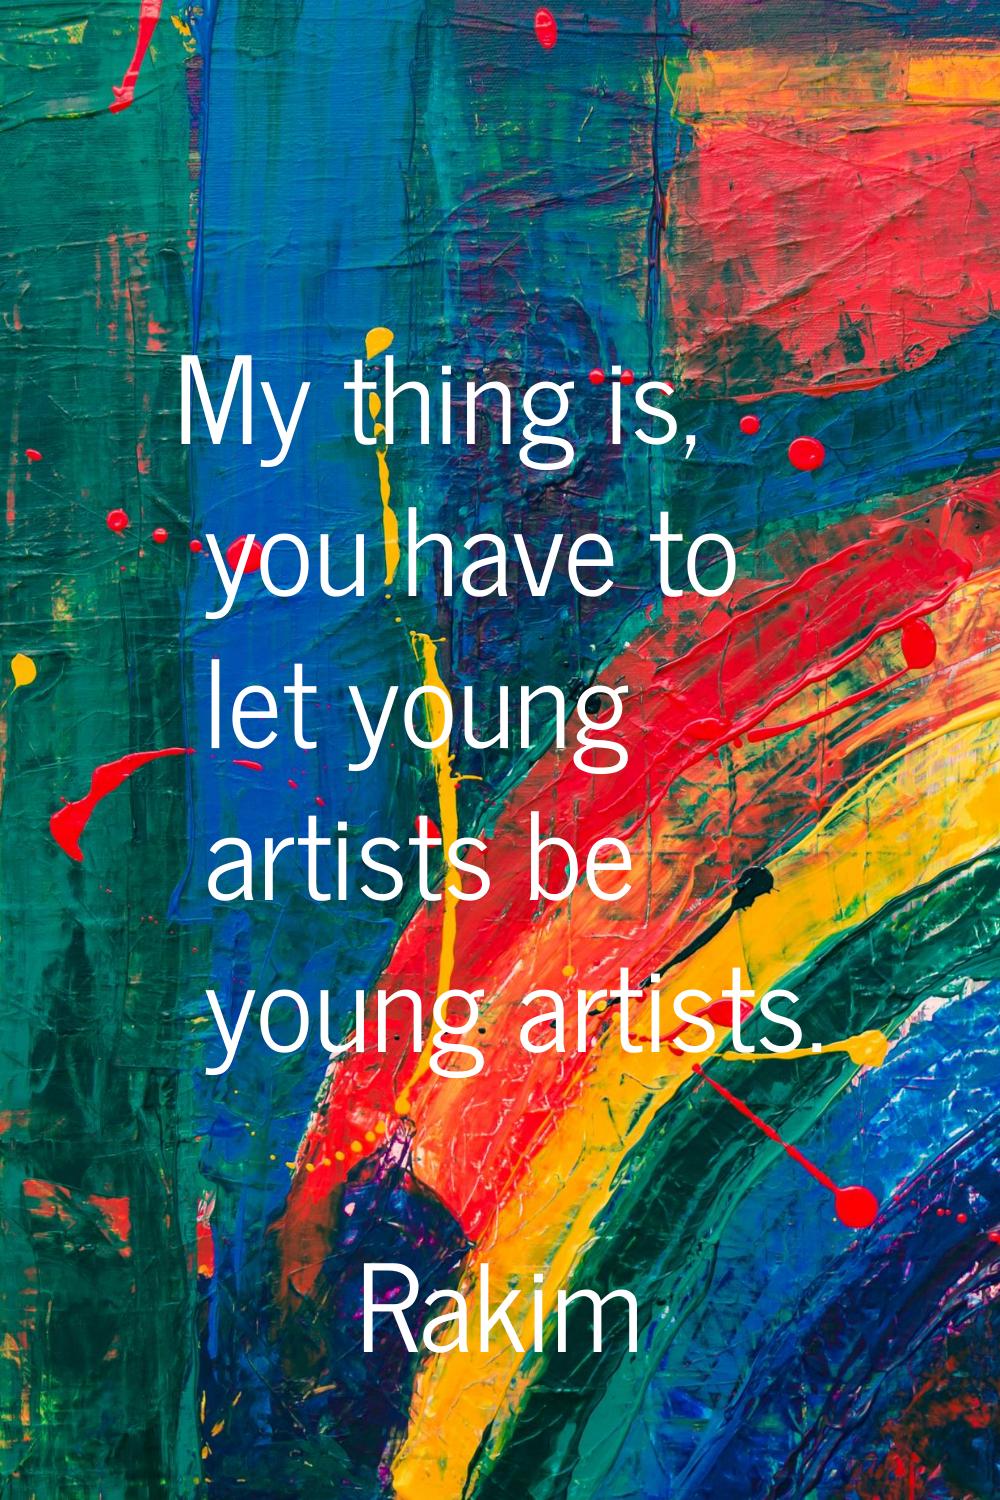 My thing is, you have to let young artists be young artists.